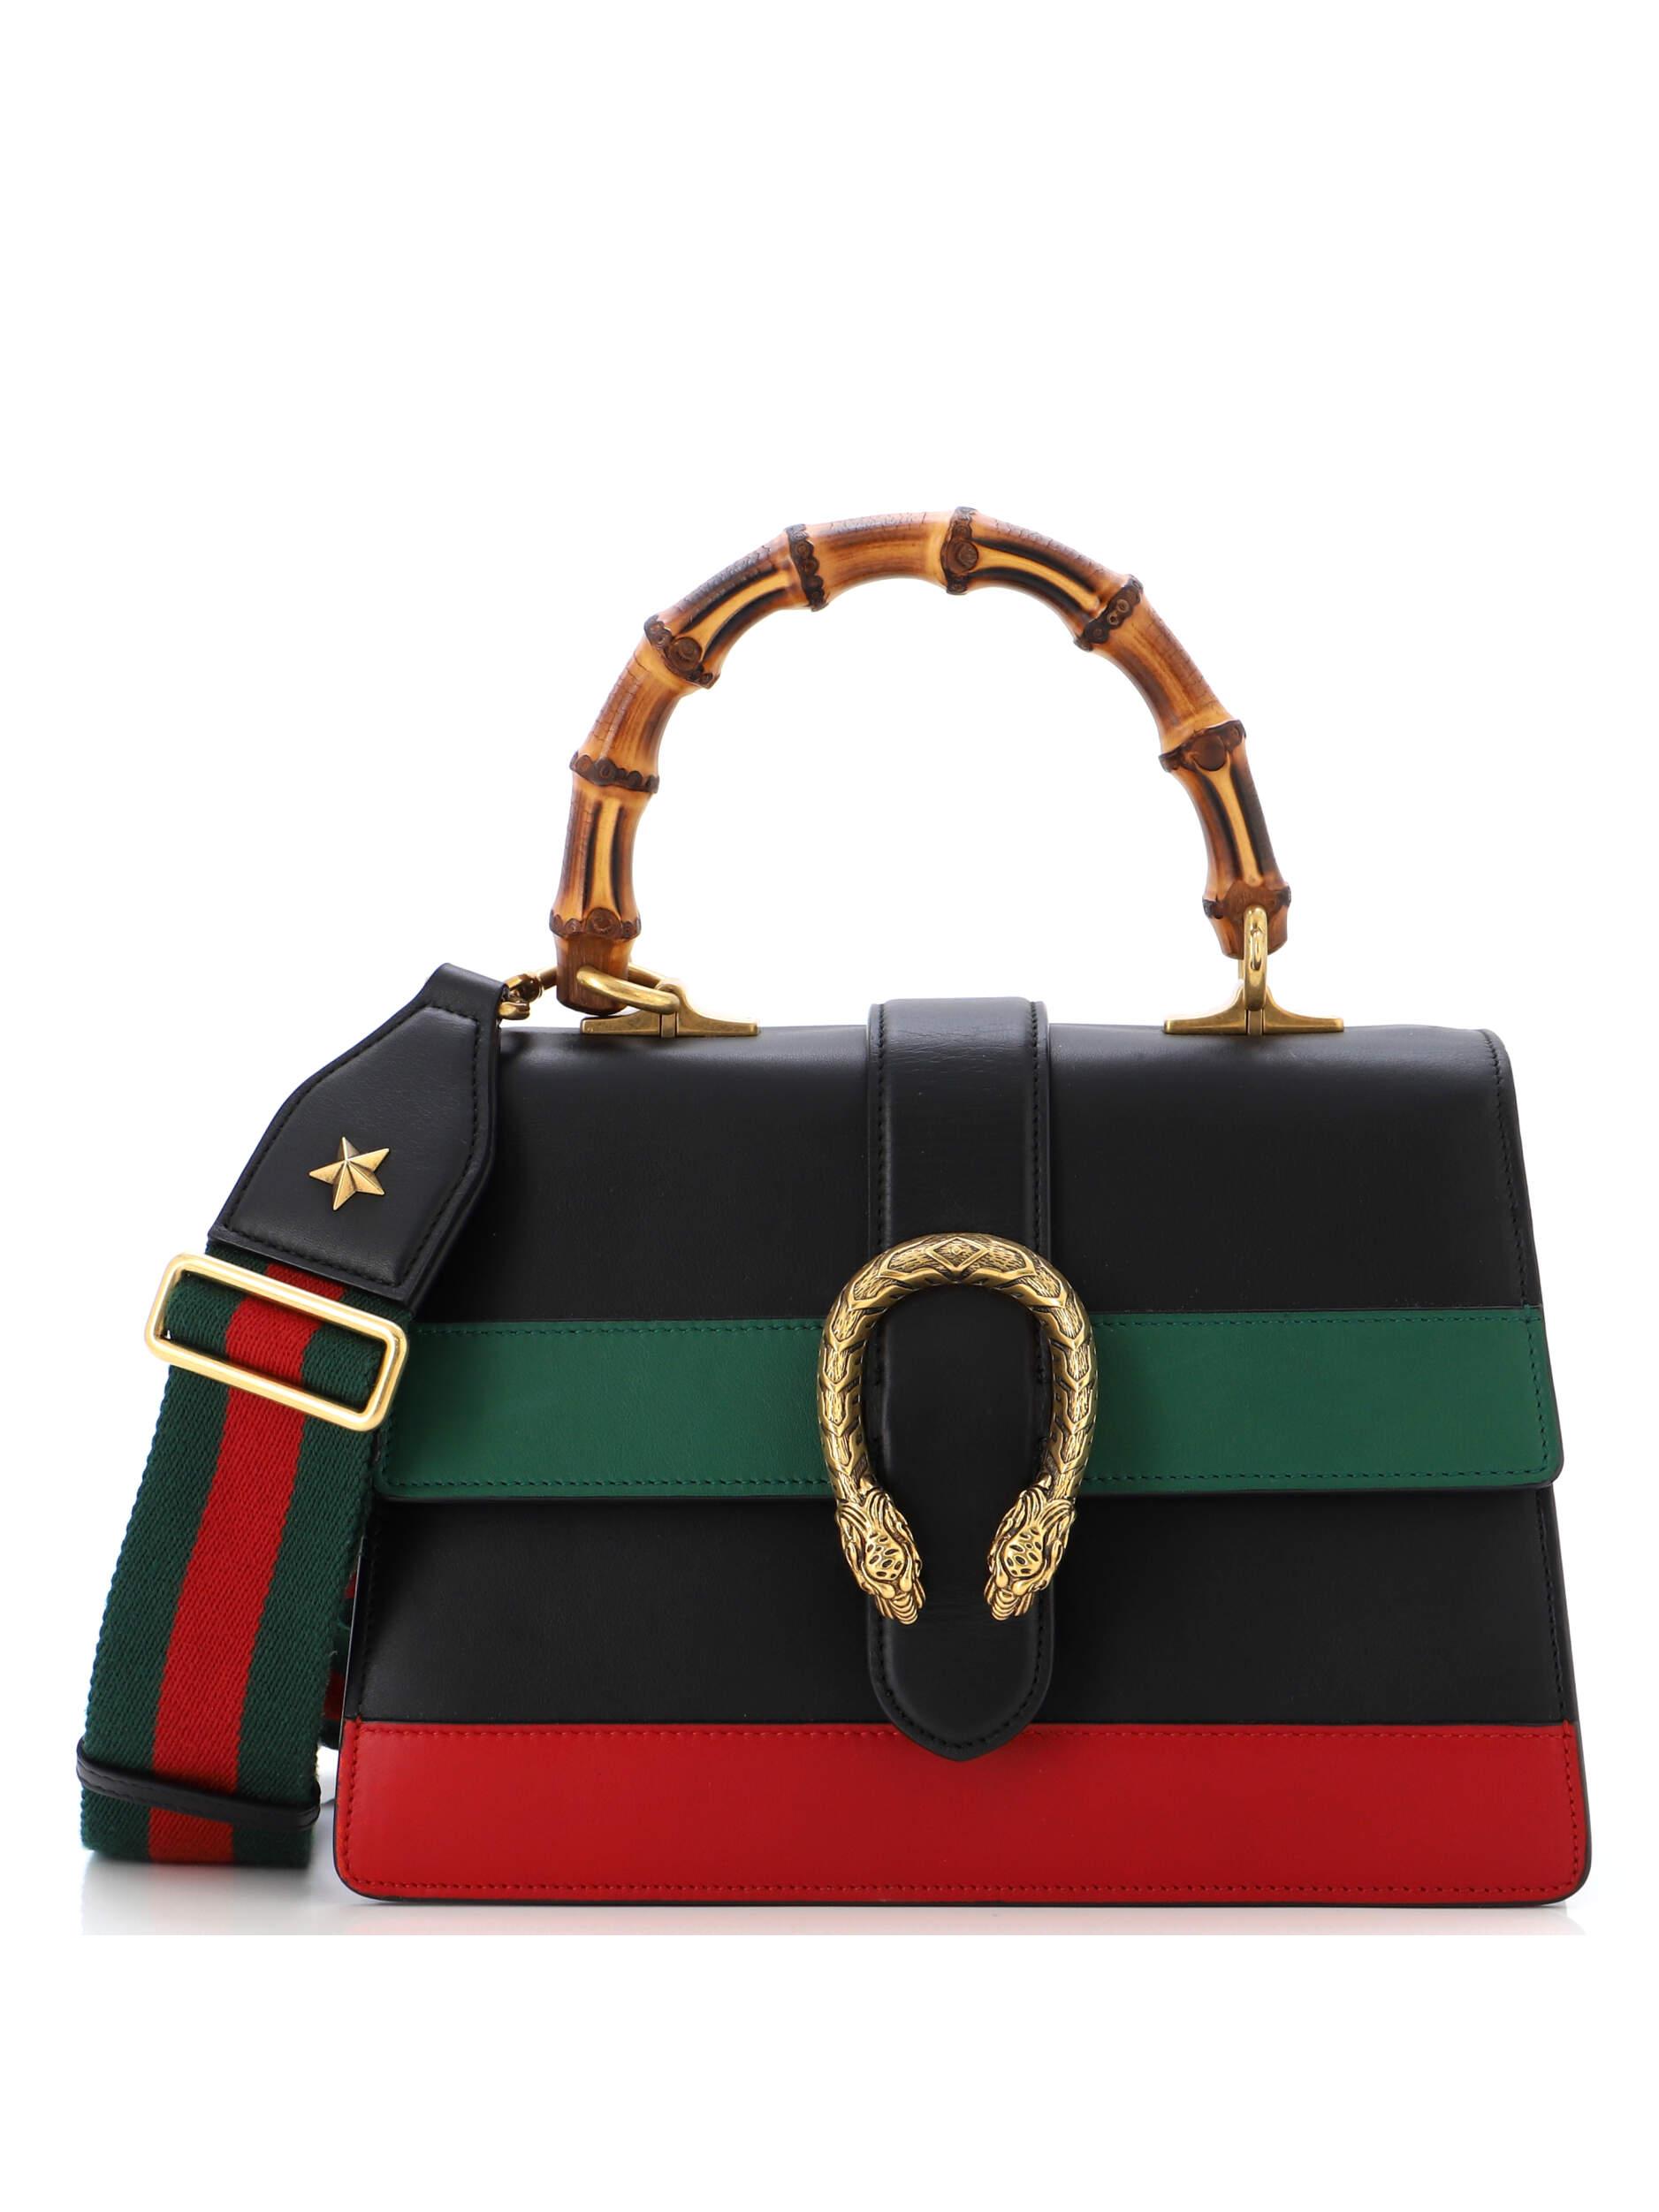 Gucci 100% Leather Black Multi Color Dionysus Bamboo Top Handle Bag ...